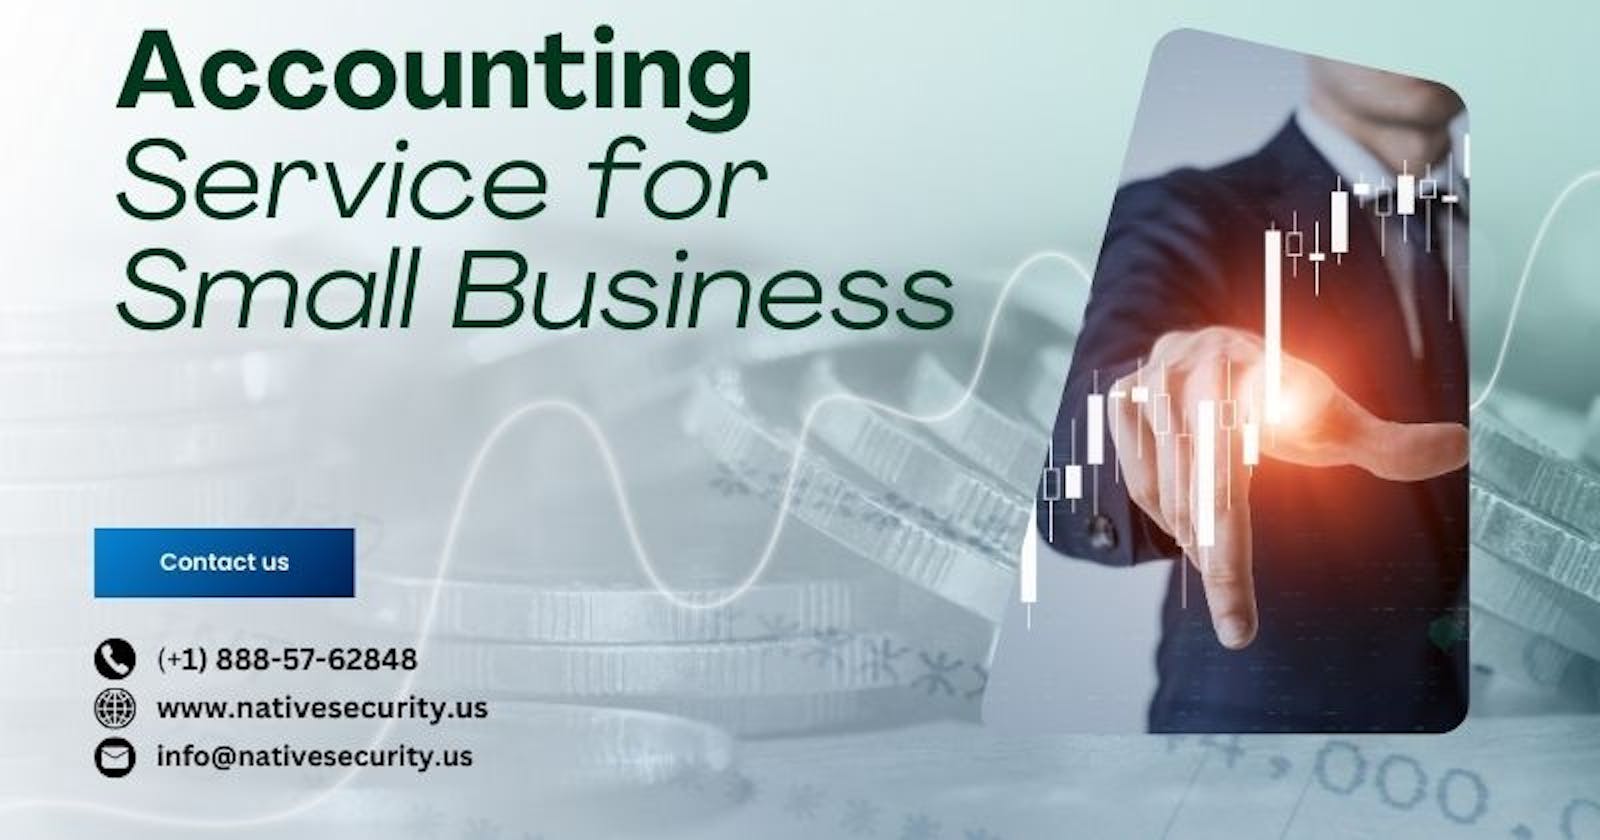 Accounting Services for Small Business